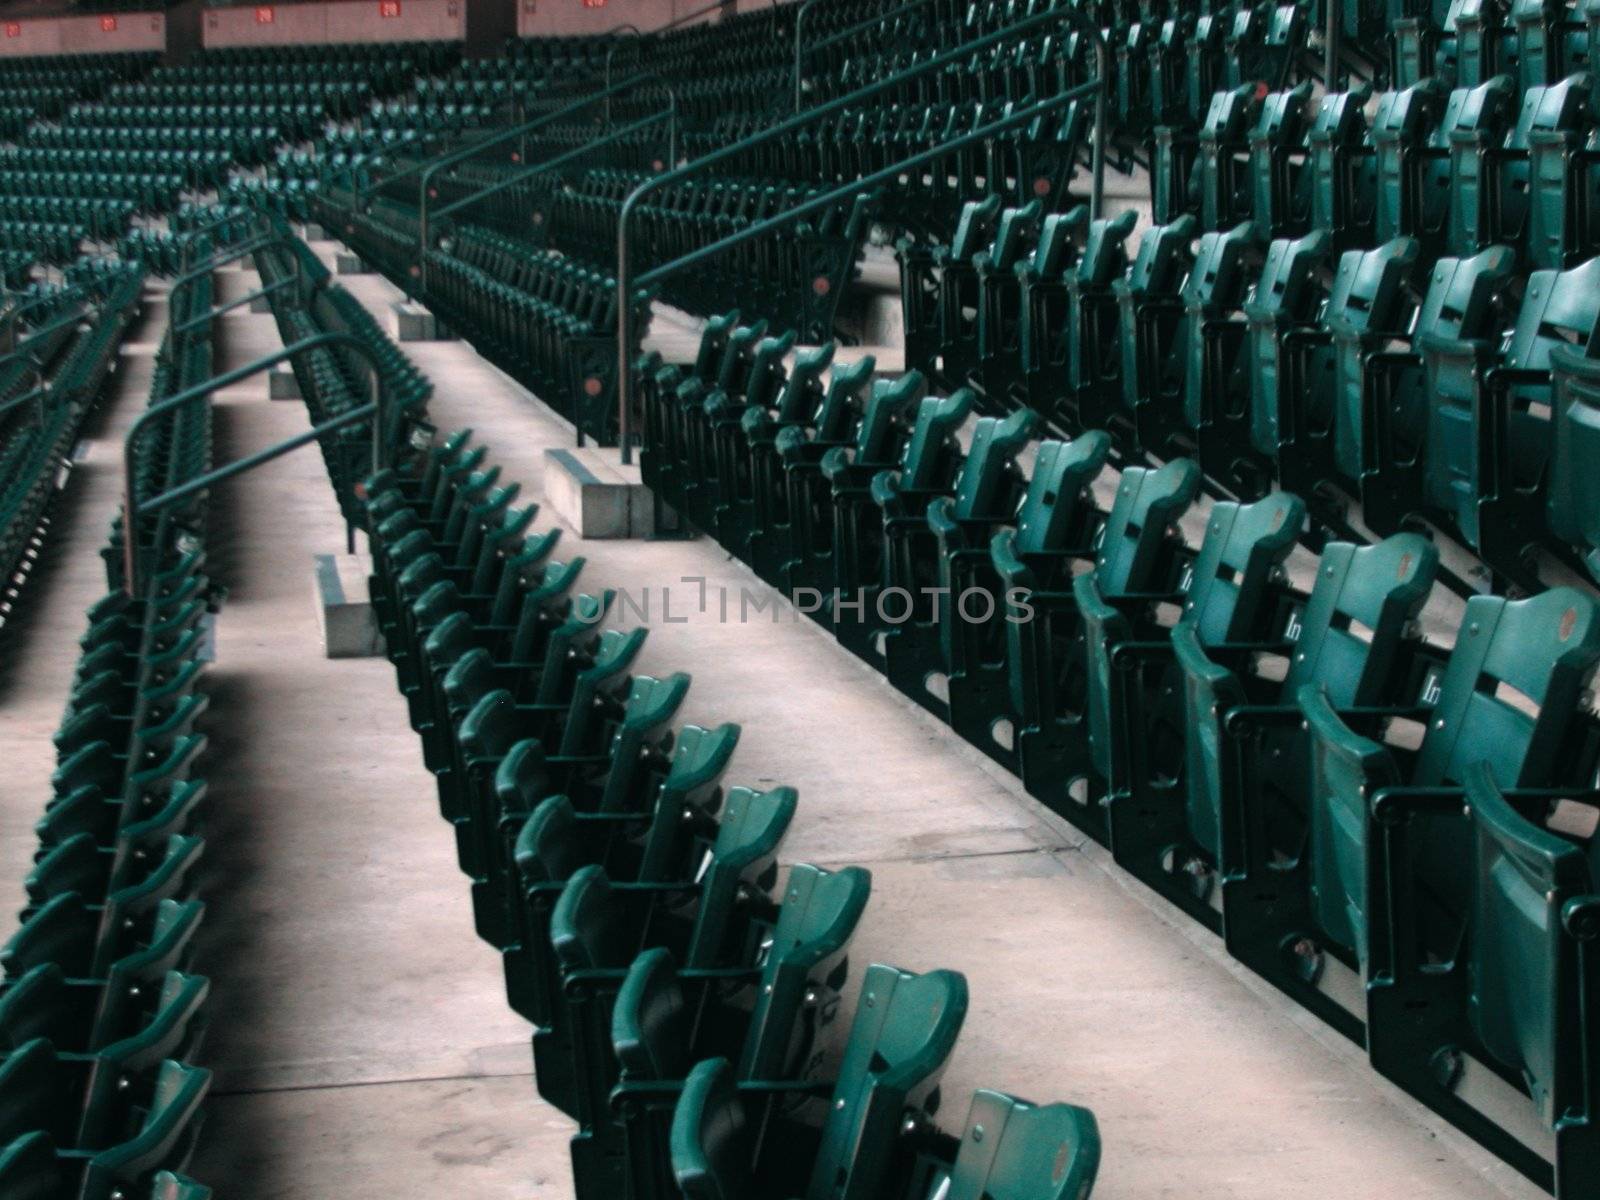 Major League Stadium Seating by pixelsnap